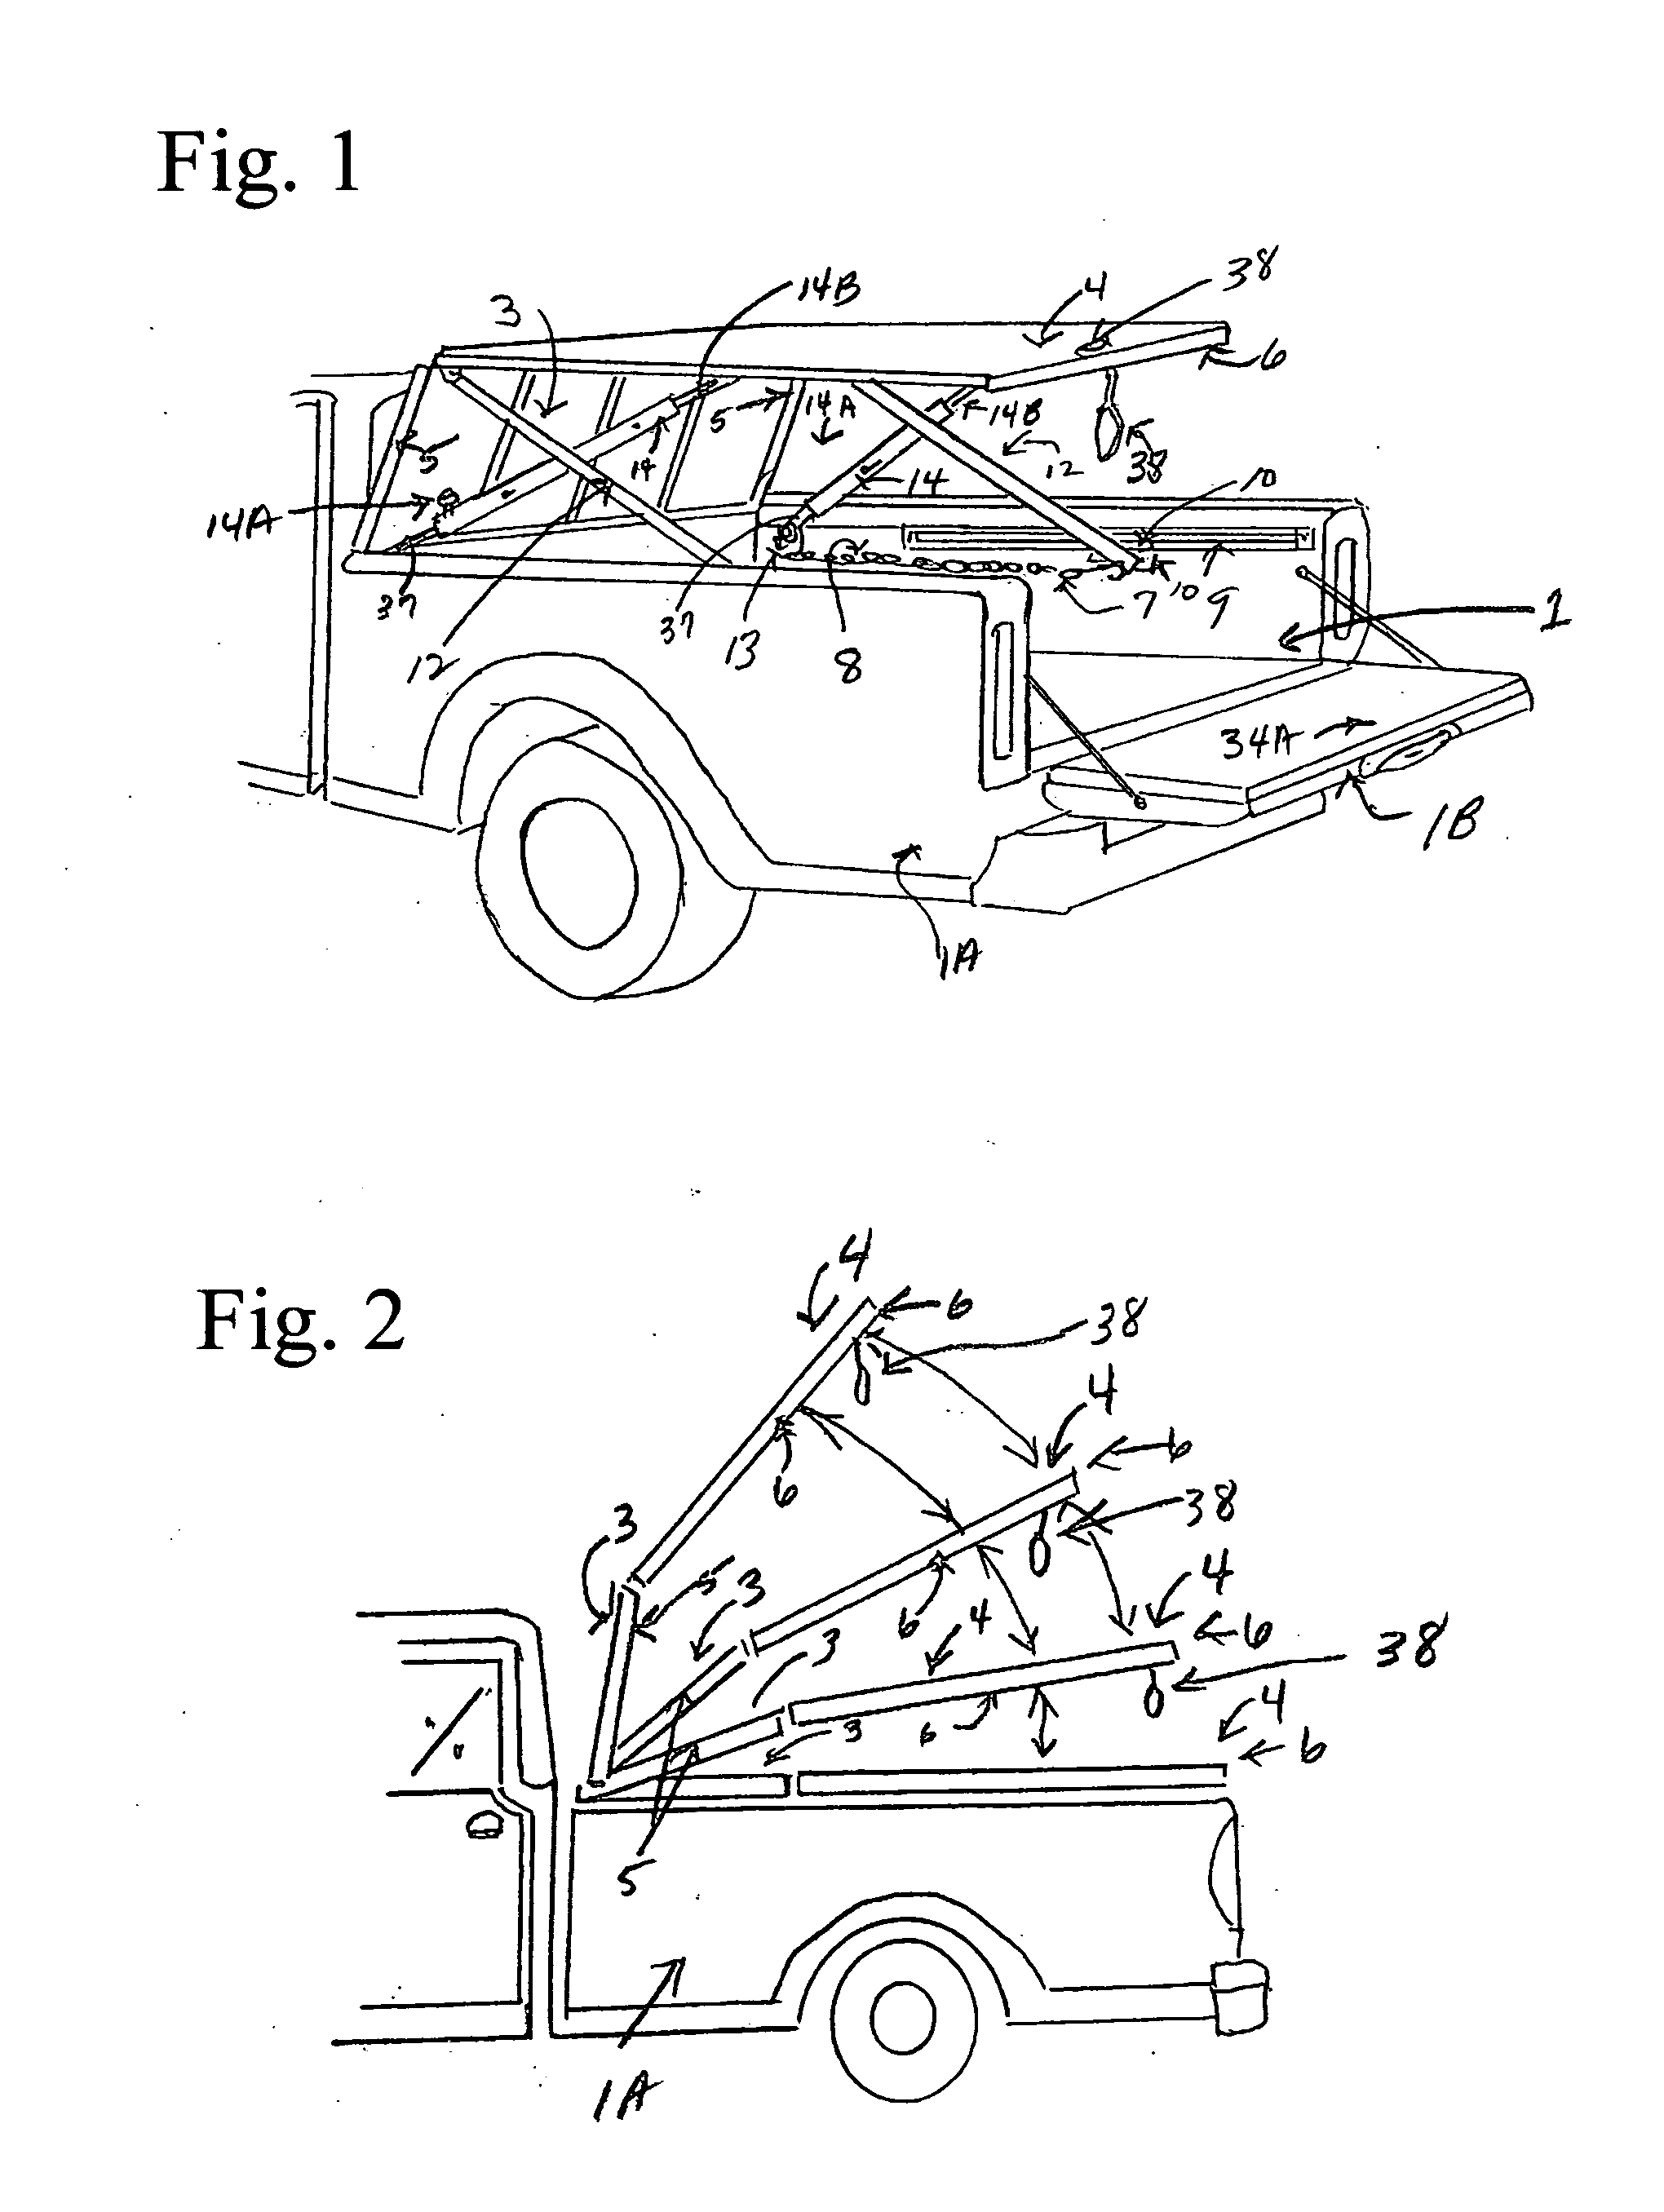 Adjustable height horizontal lockable frame method to attach and to lift a truck bed cover